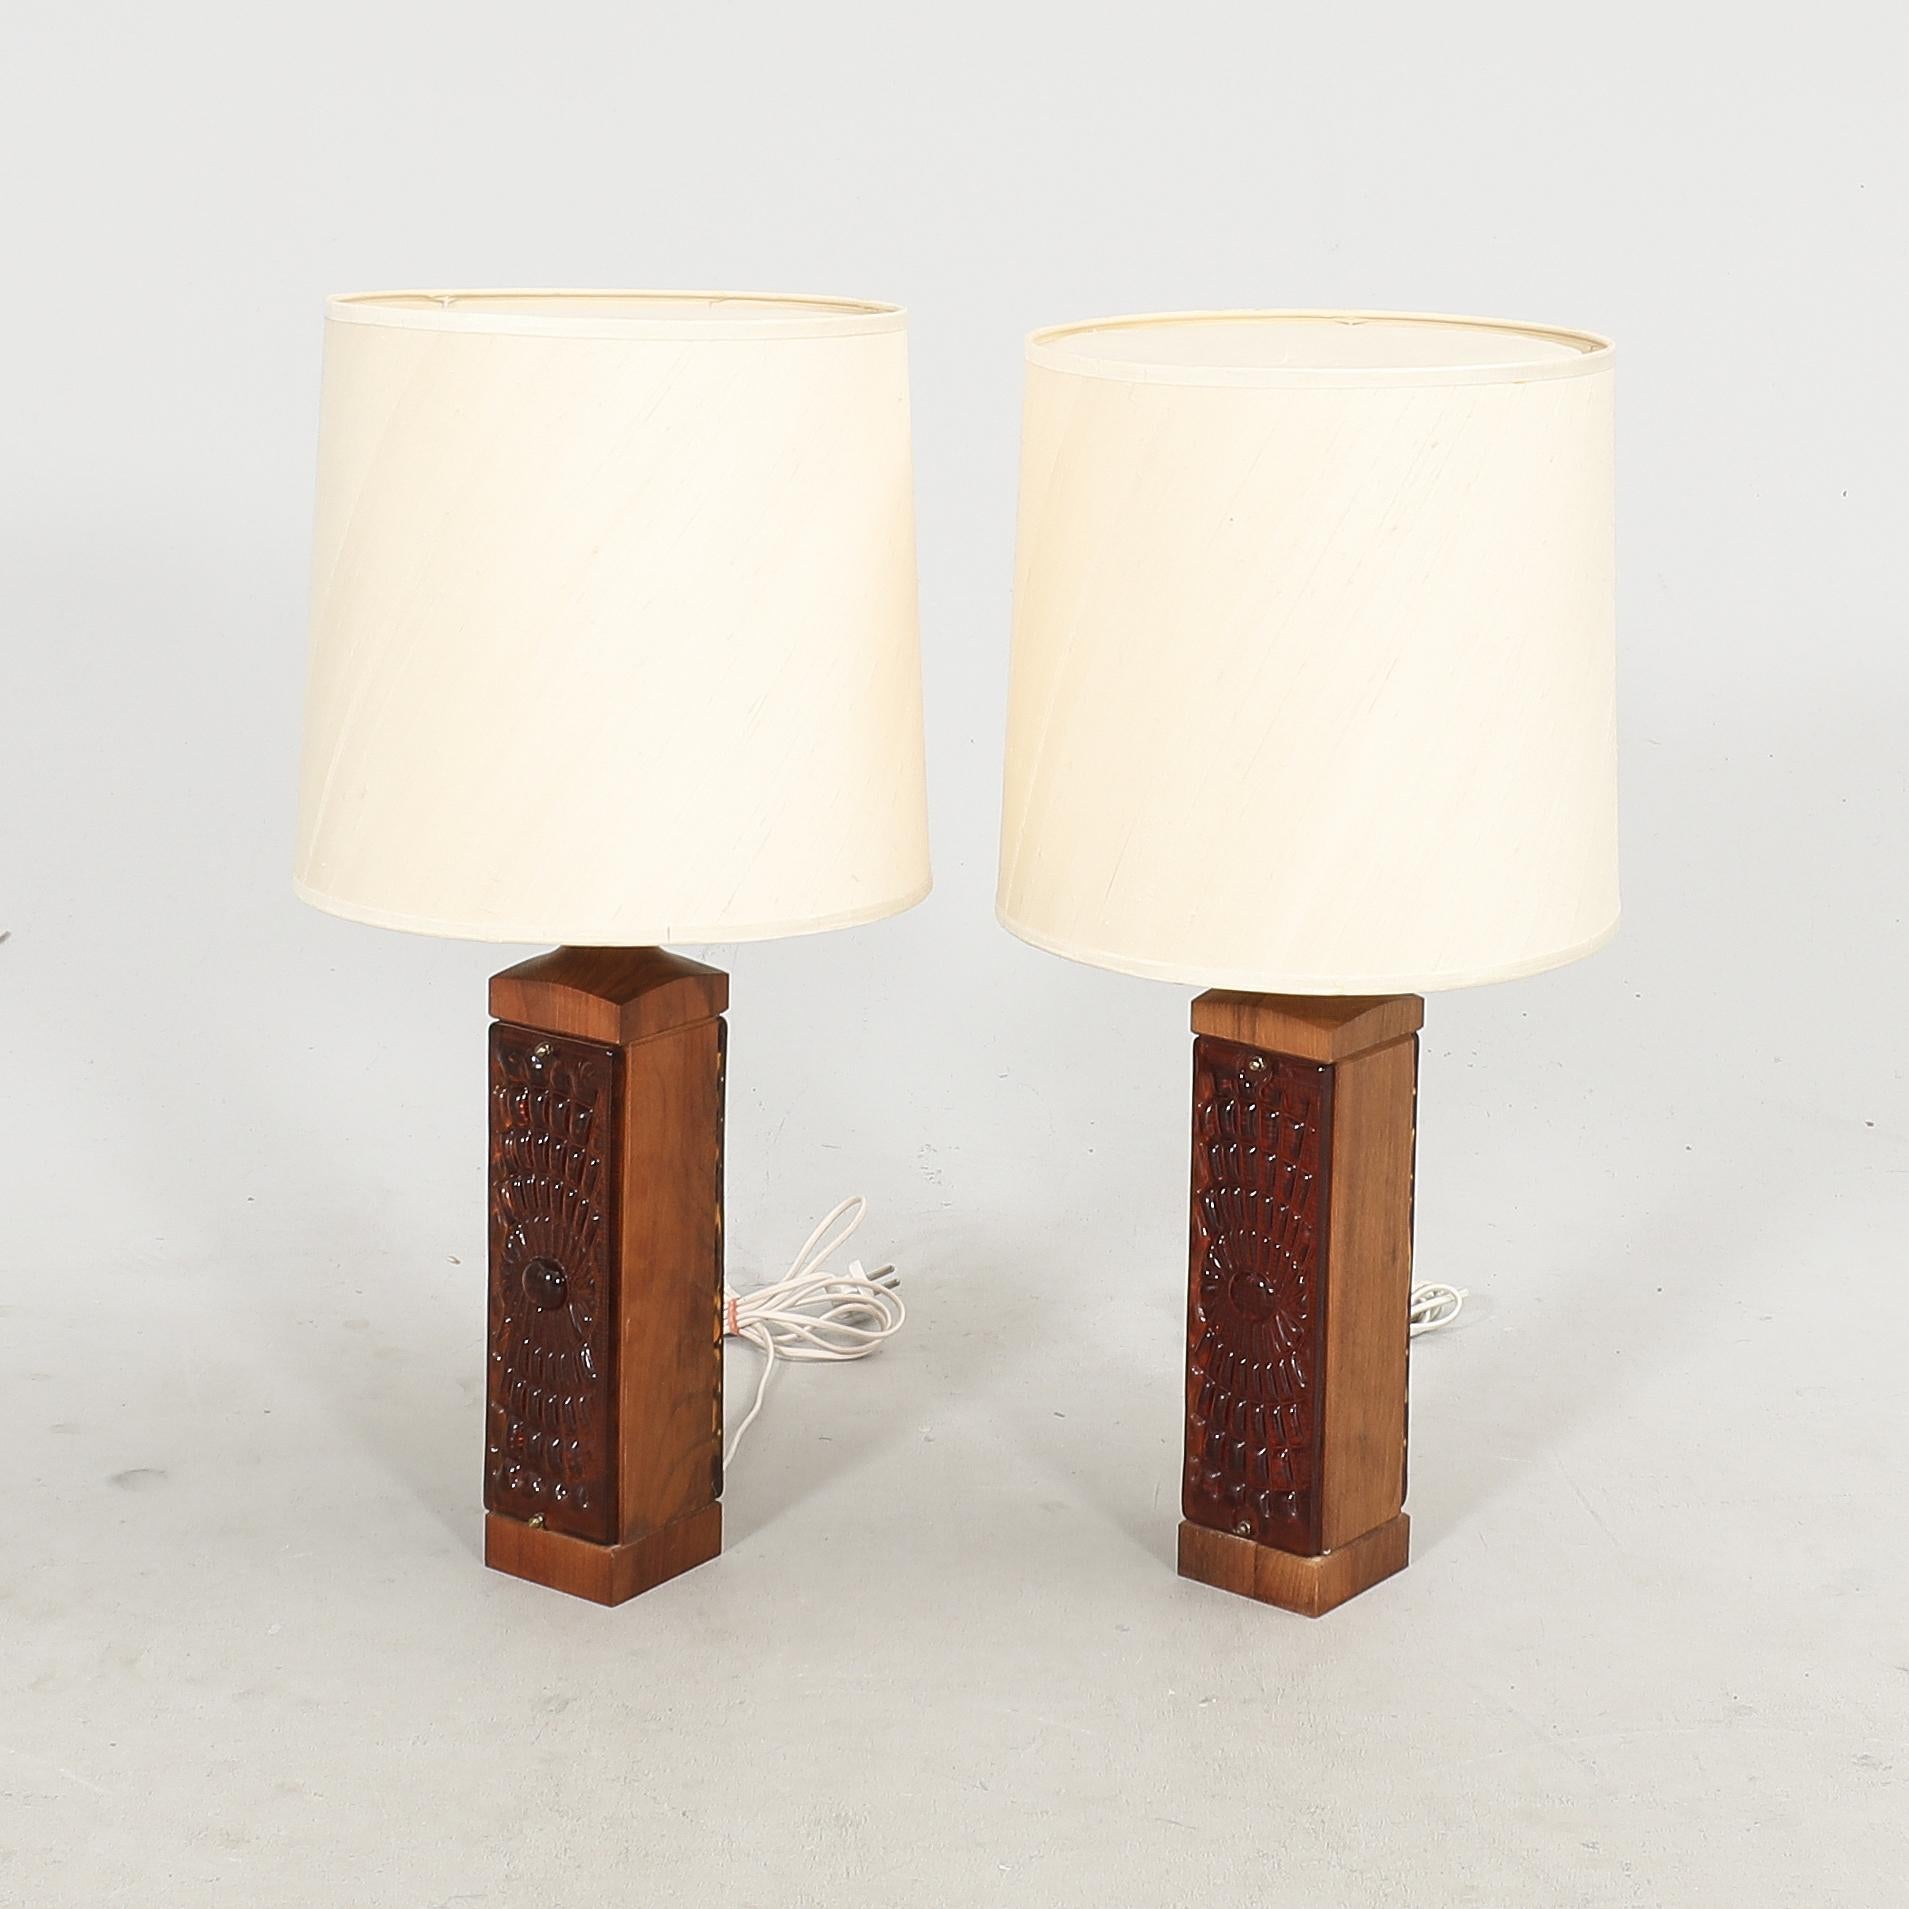 Scandinavian Modern Anonymous Table lamp in amber red Cast Glass and Teak a Pair , Denmark, 1970s For Sale